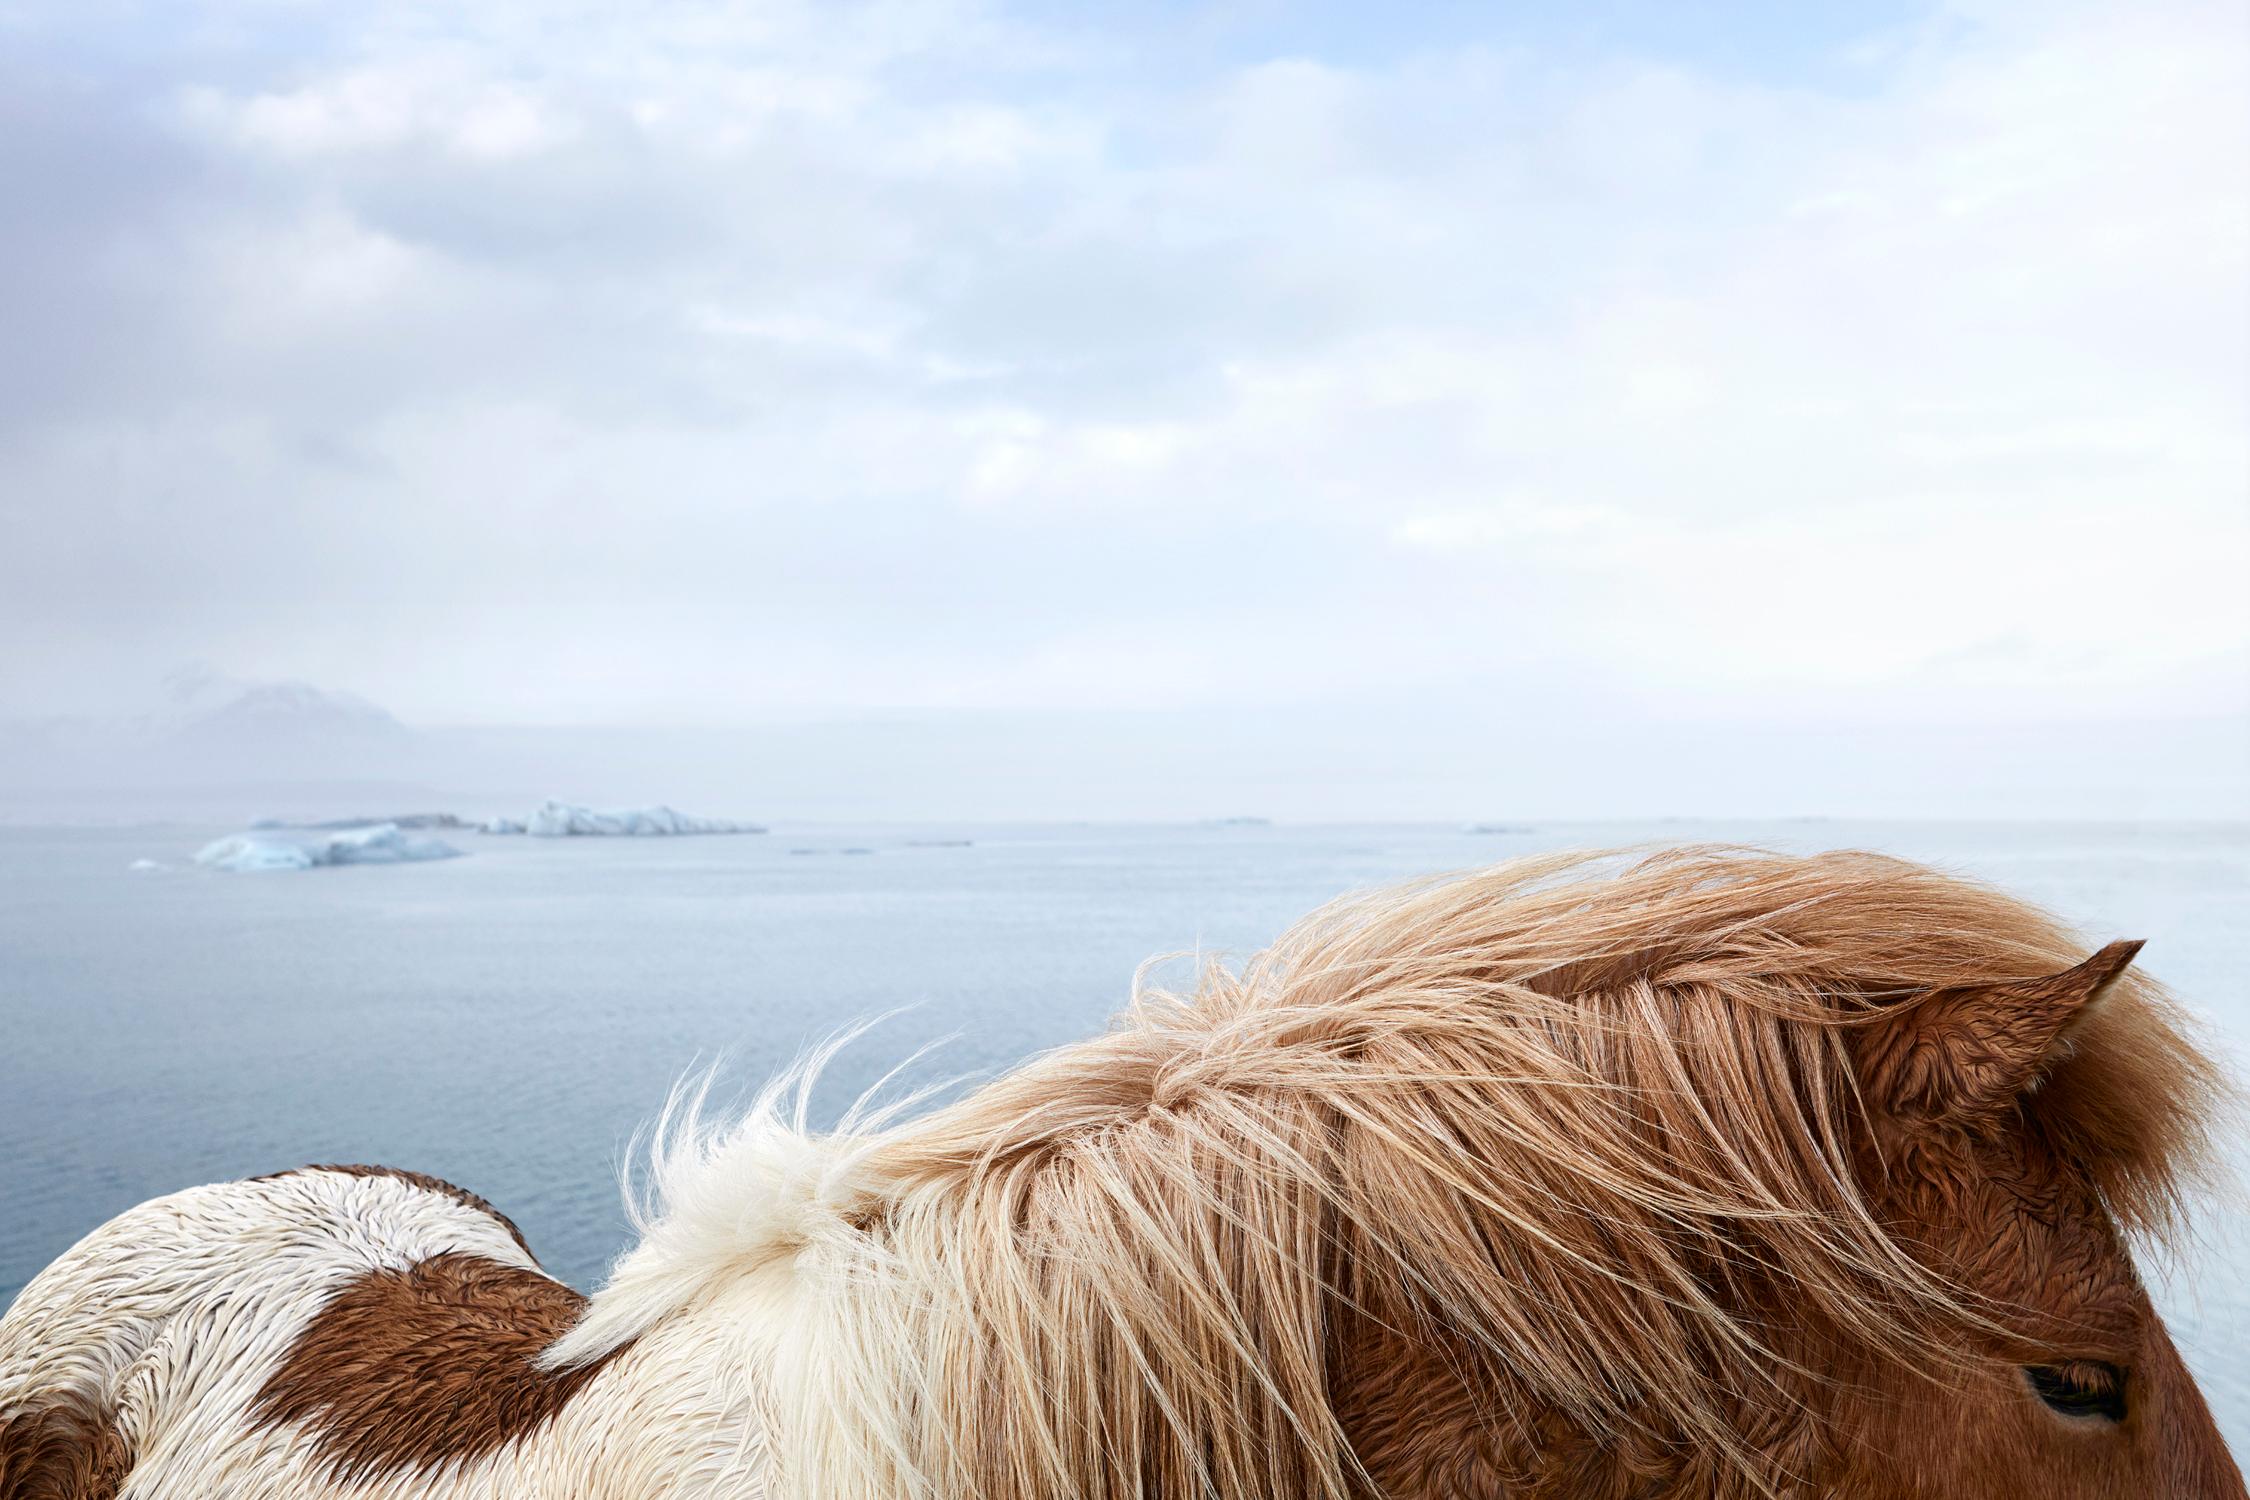 Drew Doggett Color Photograph - Colorful Icelandic horse against the surreal backdrop of glacial water and ice